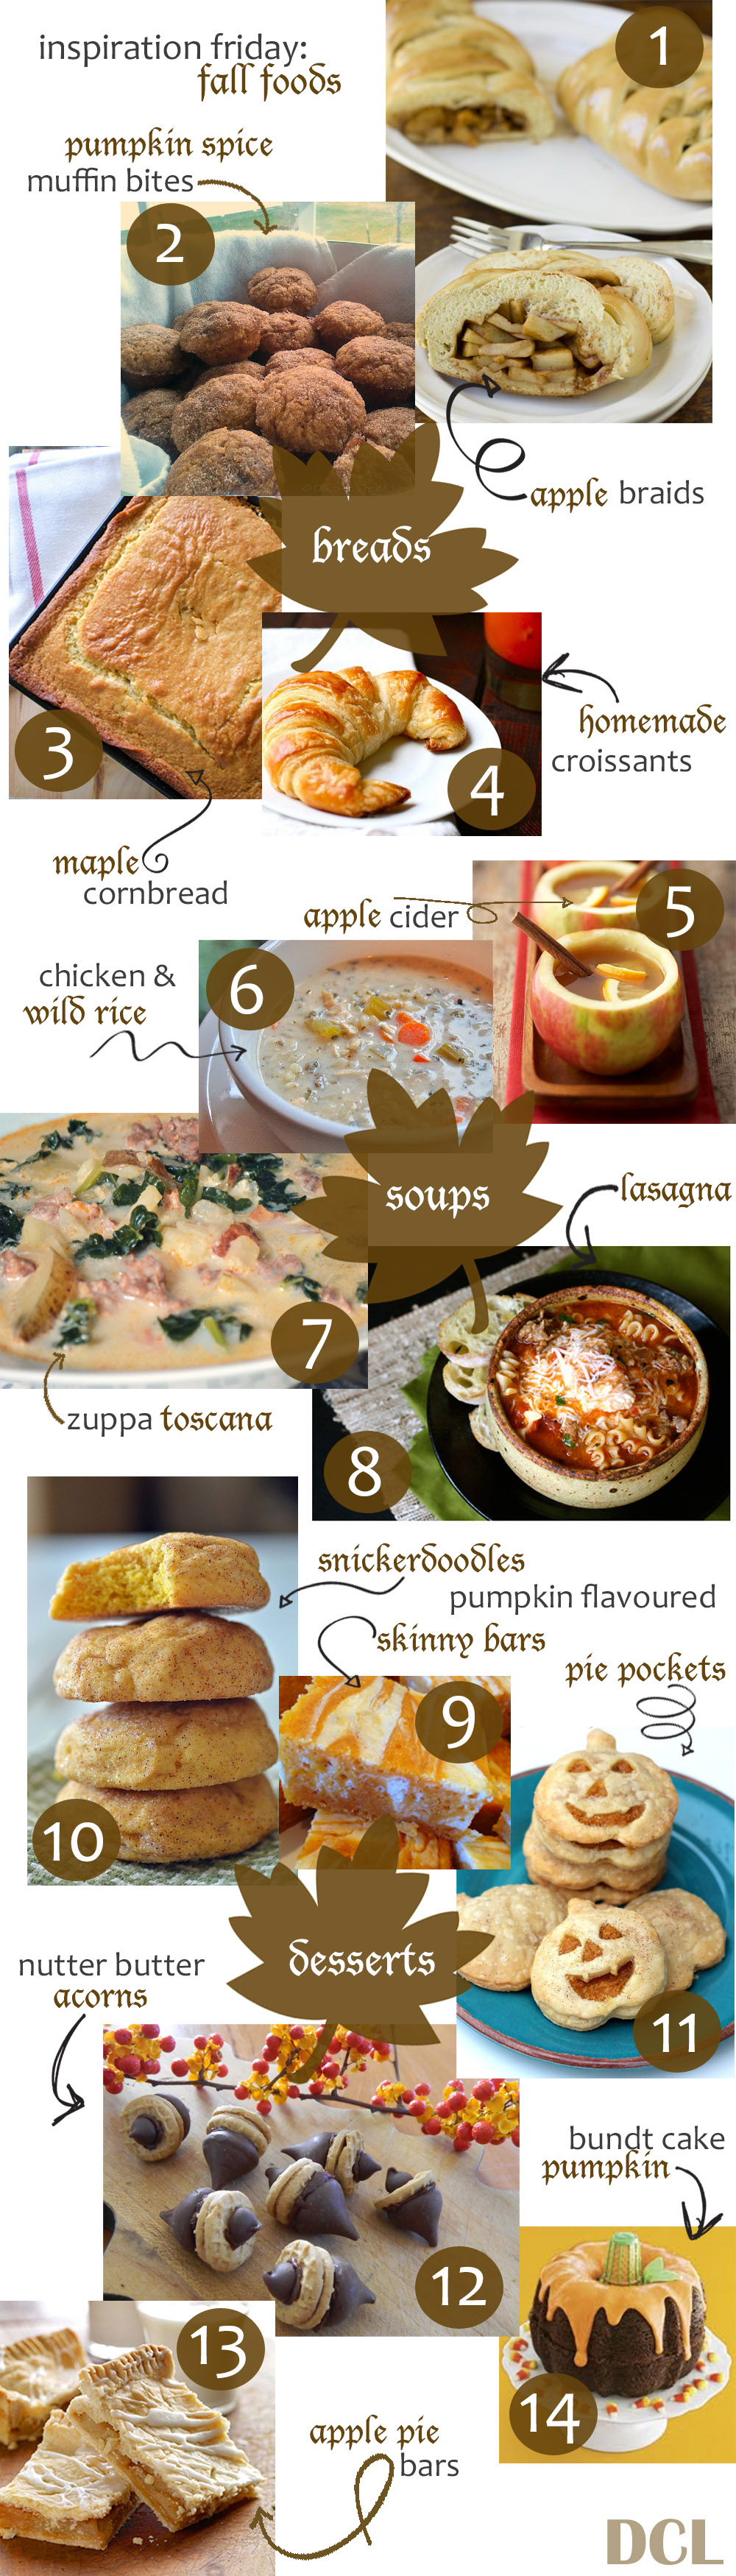 Inspiration Friday: Fall Foods